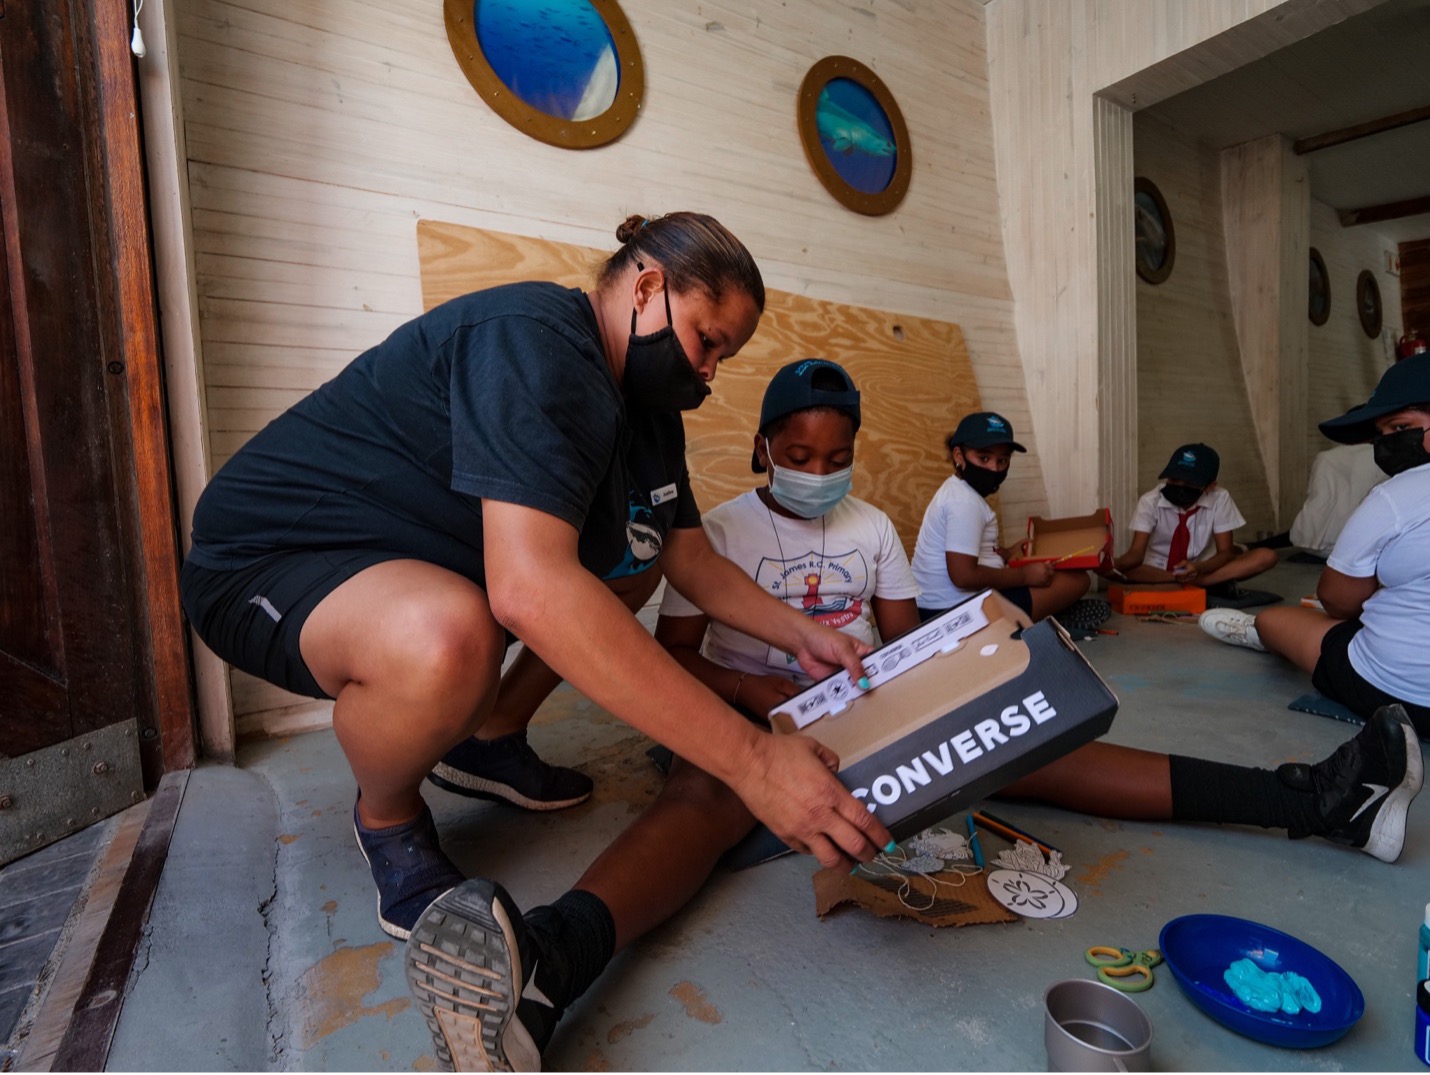 Sea School learners get to visit our centre in Kalk Bay and unleash their inner artists through ocean-inspired arts and crafts. Image by Danel Wentzel.